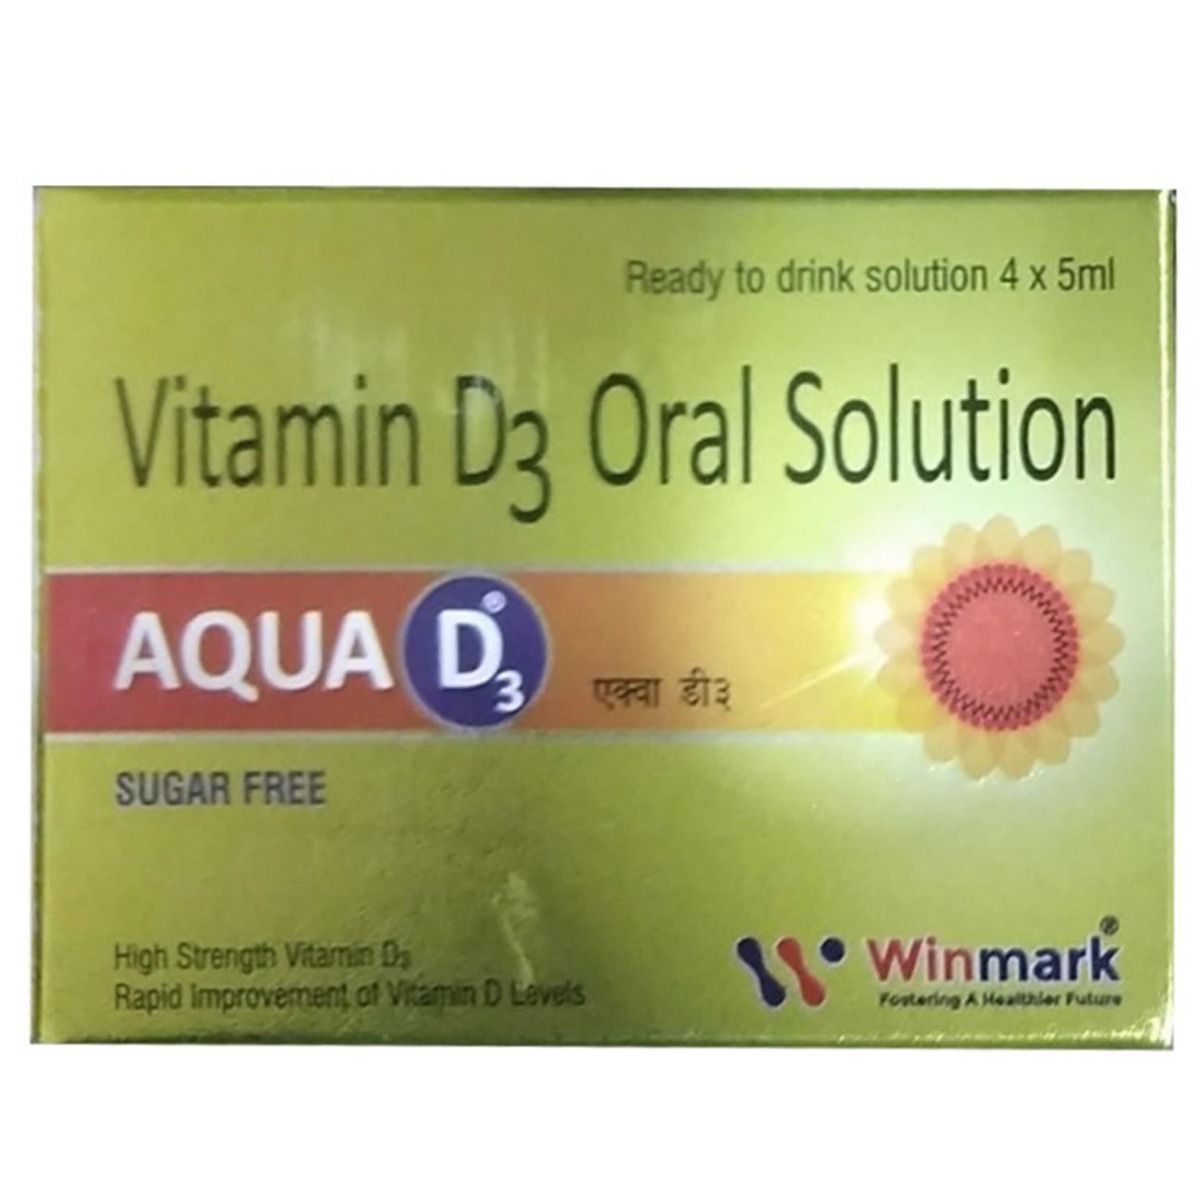 Aqua D3 Sugar Free Oral Solution 5 ml Price, Uses, Side Effects, Composition - Apollo Pharmacy